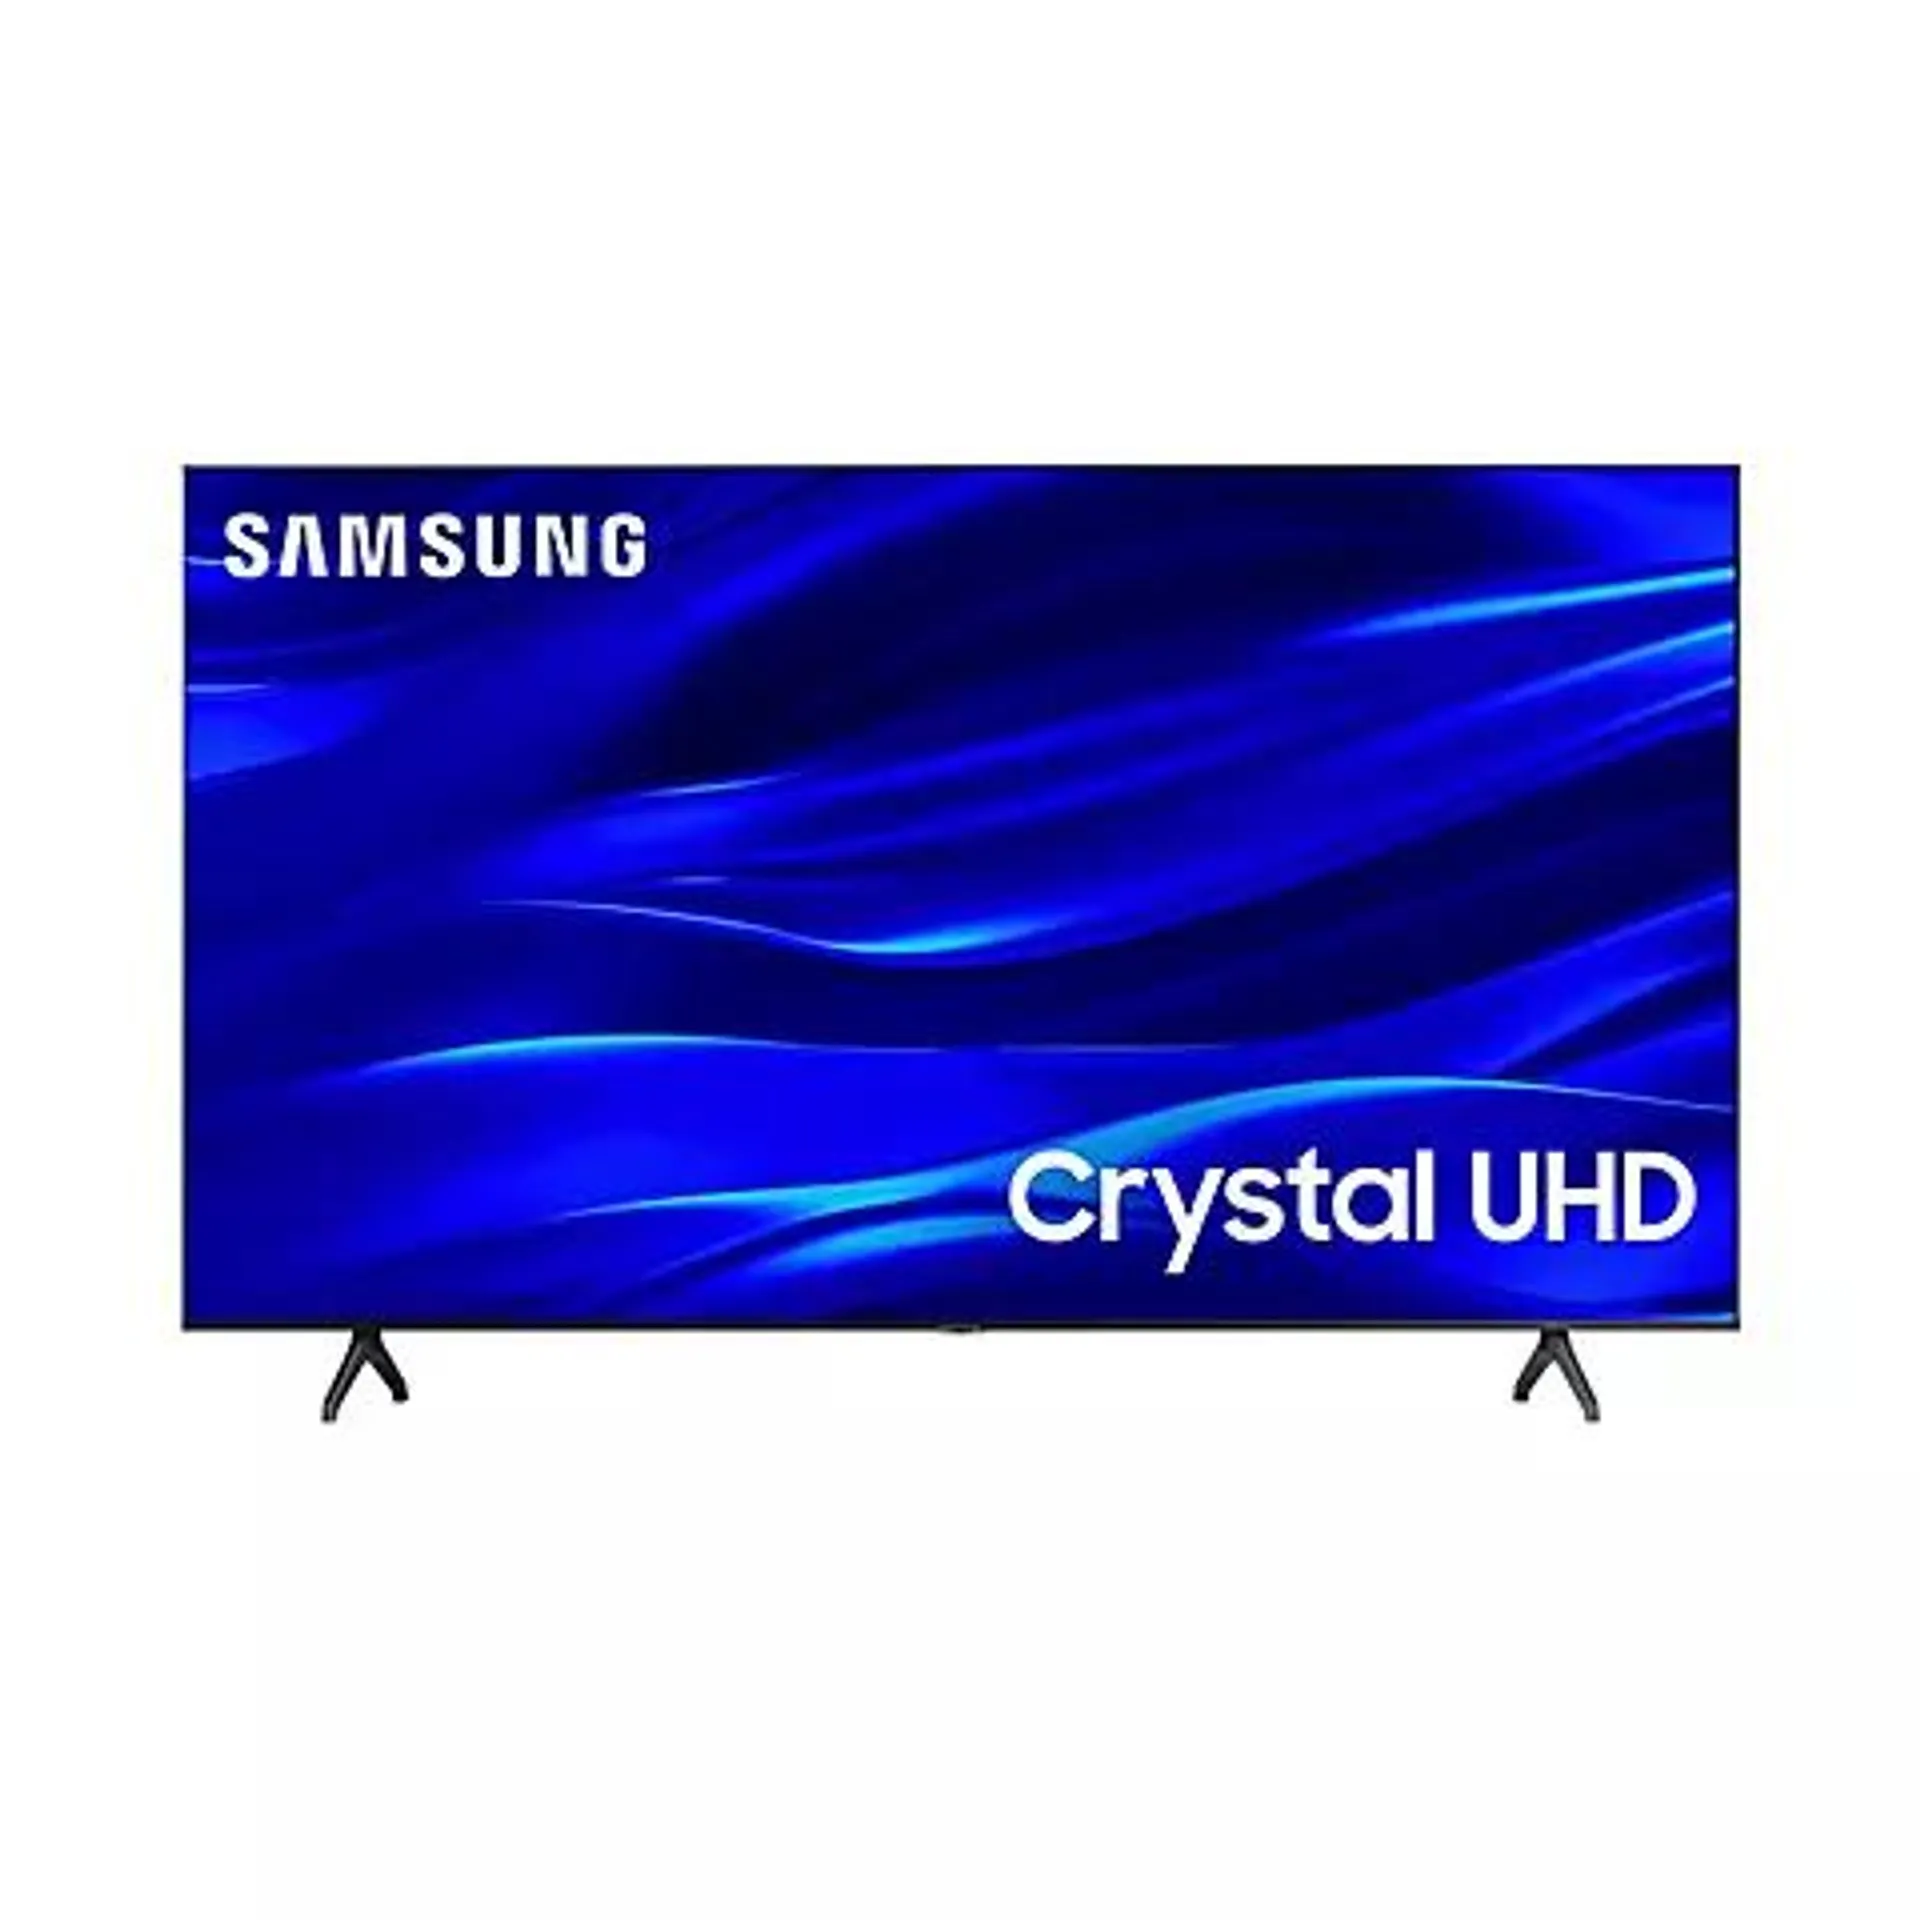 Samsung 65" TU690T Crystal UHD 4K Smart TV with 2-Year Coverage